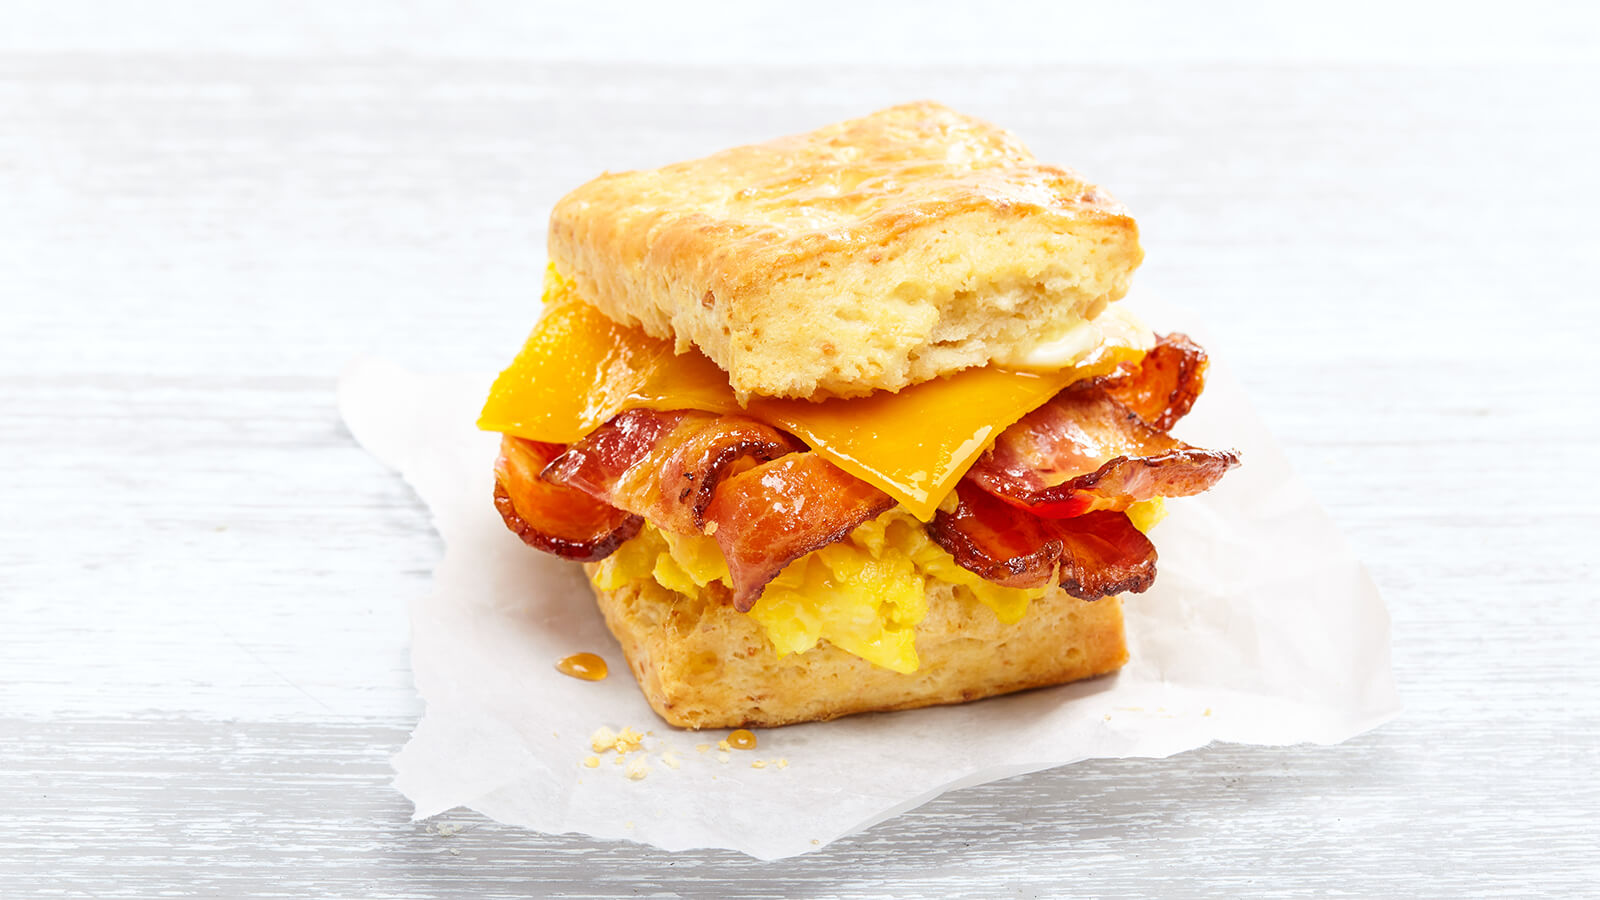 Bacon Egg and Cheese biscuit